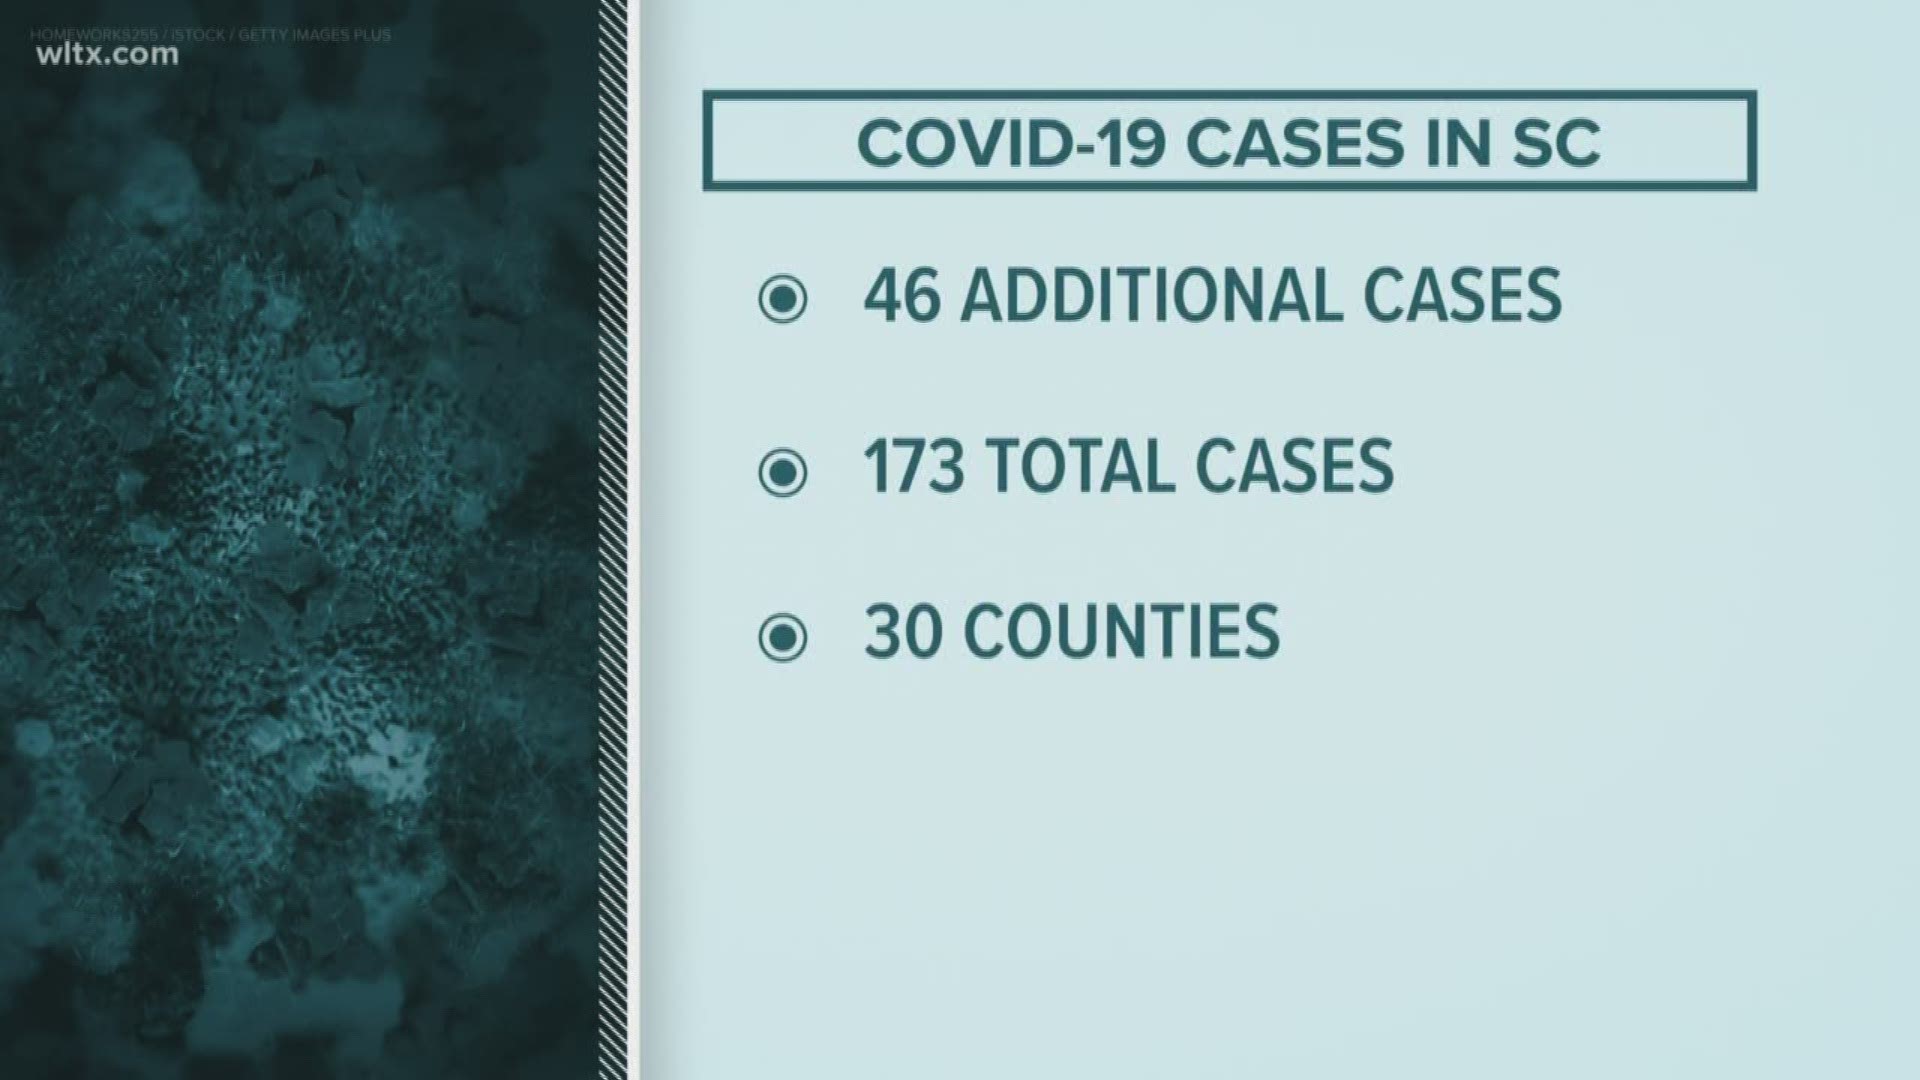 With the new numbers, all counties in the Midlands of South Carolina now have at least one coronavirus case.